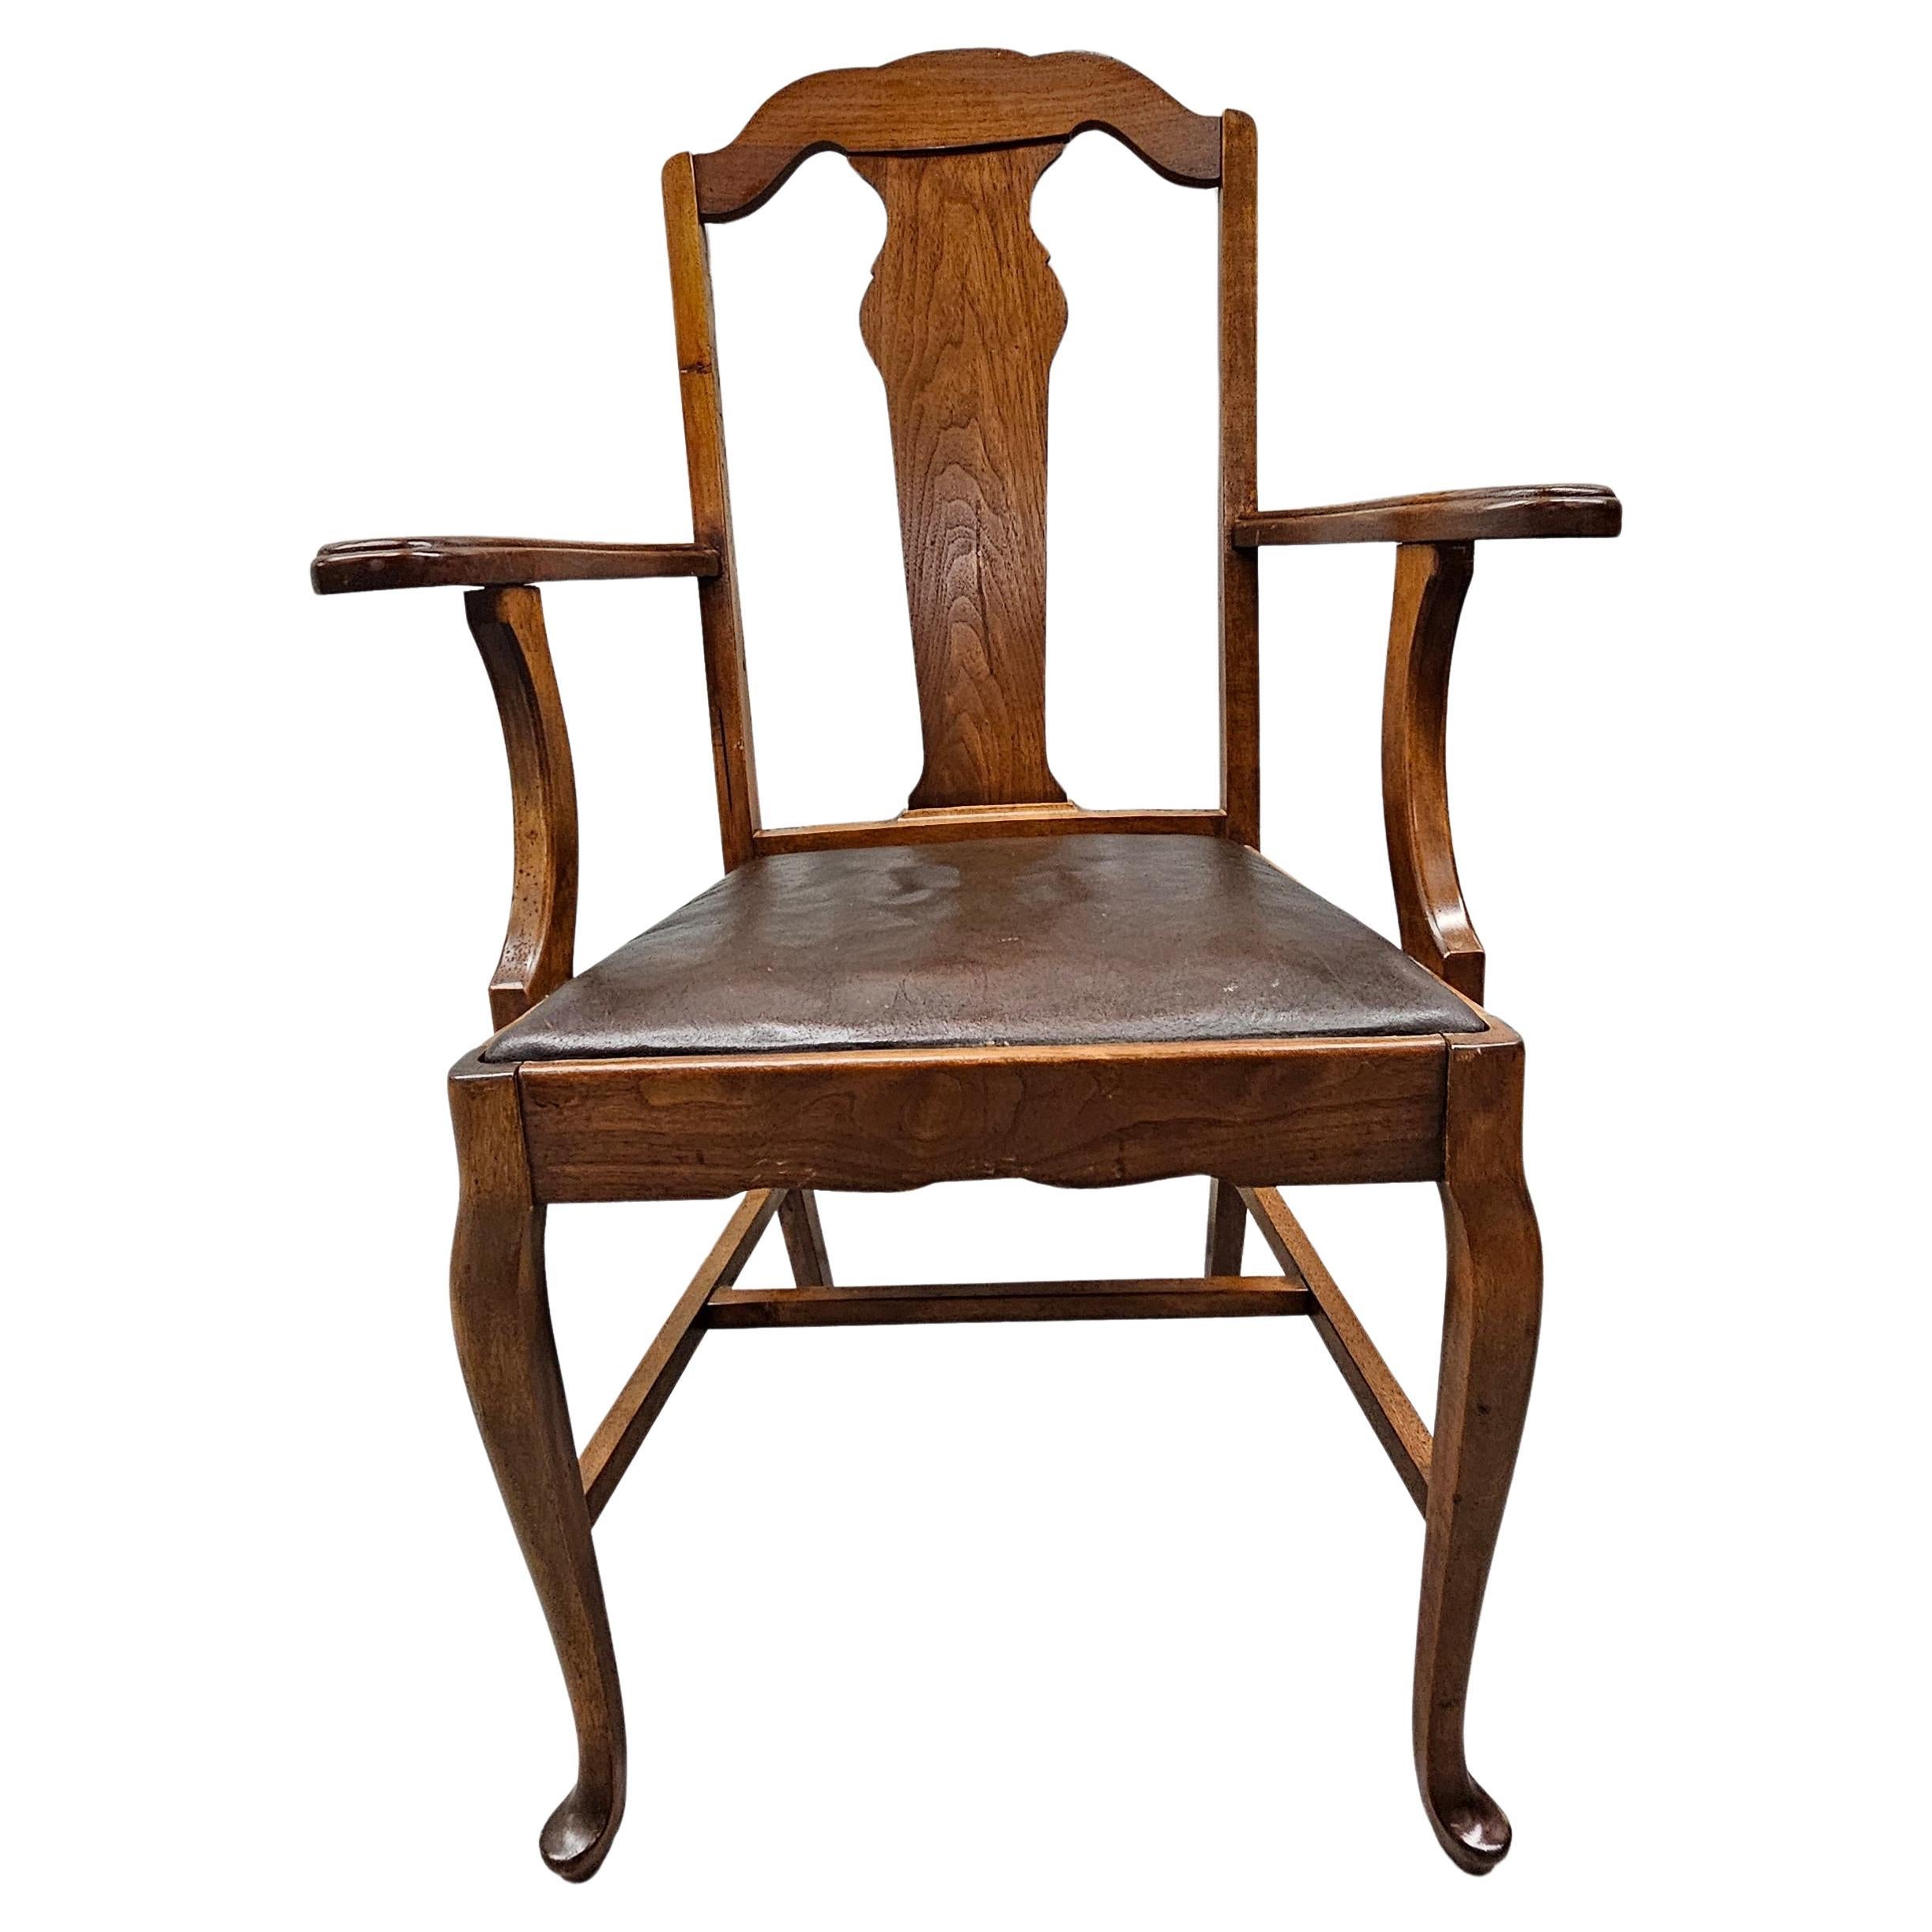 1916 Sikes Furniture Walnut & Leather Upholstered Seat Armchair For Sale